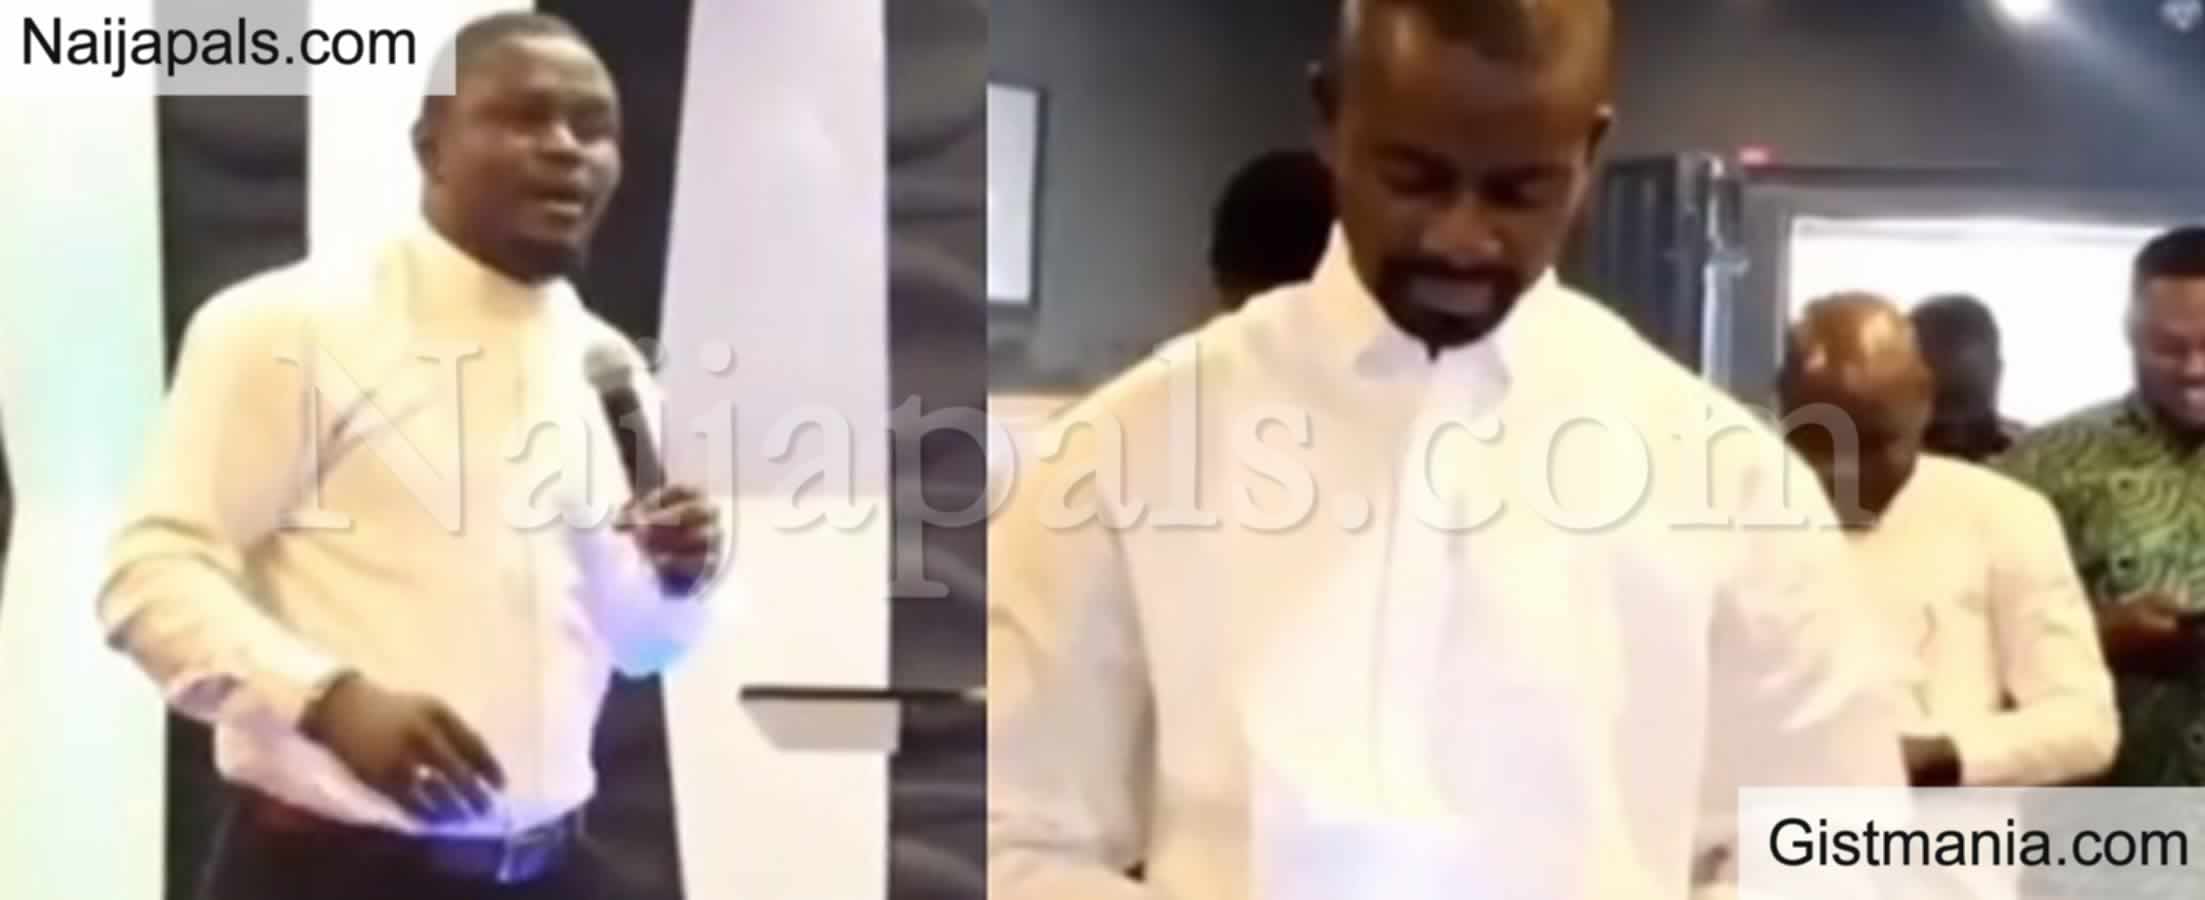 <img alt='.' class='lazyload' data-src='https://img.gistmania.com/emot/video.gif' /> <b>Pastor Makes Men Transfer Money To Their Wives And Girlfriend During Church Service</b> (VIDEO)